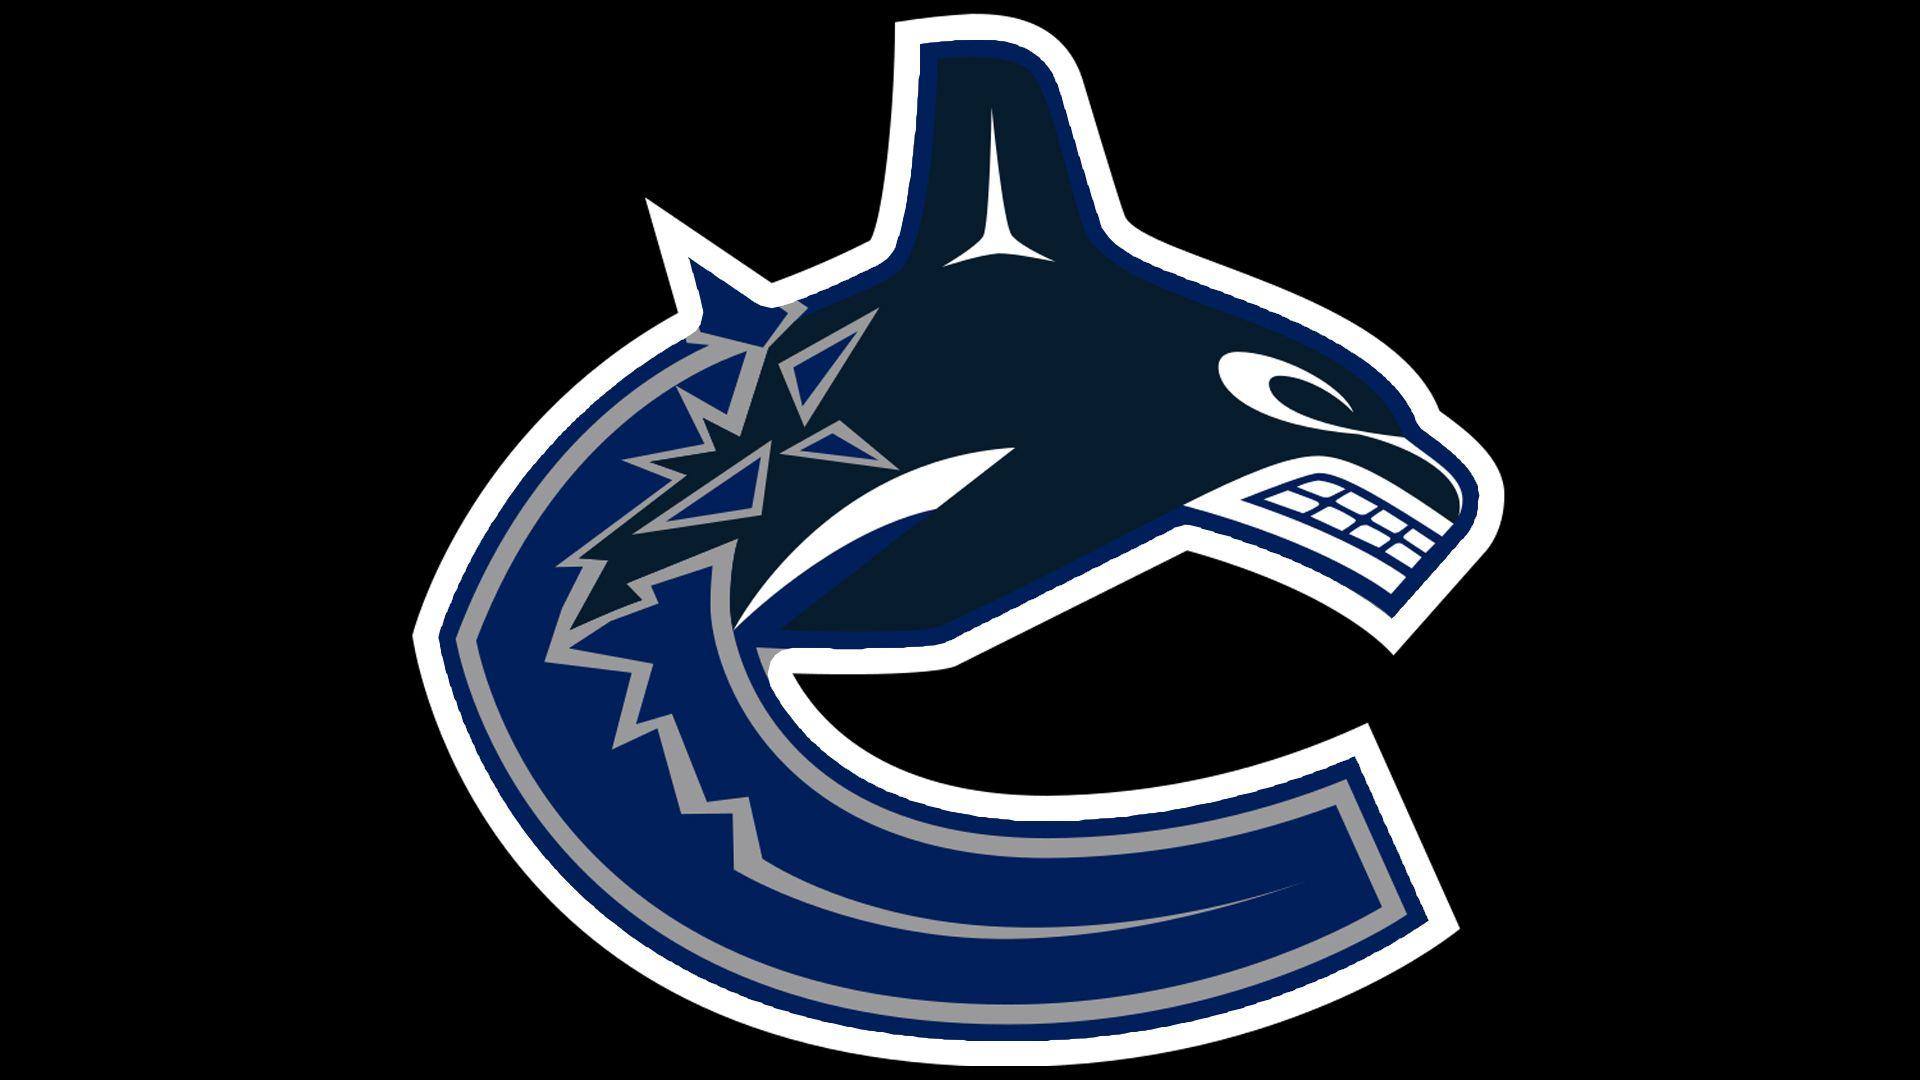 Vancouver Canucks Logo - Vancouver Canucks Logo, Vancouver Canucks Symbol, Meaning, History